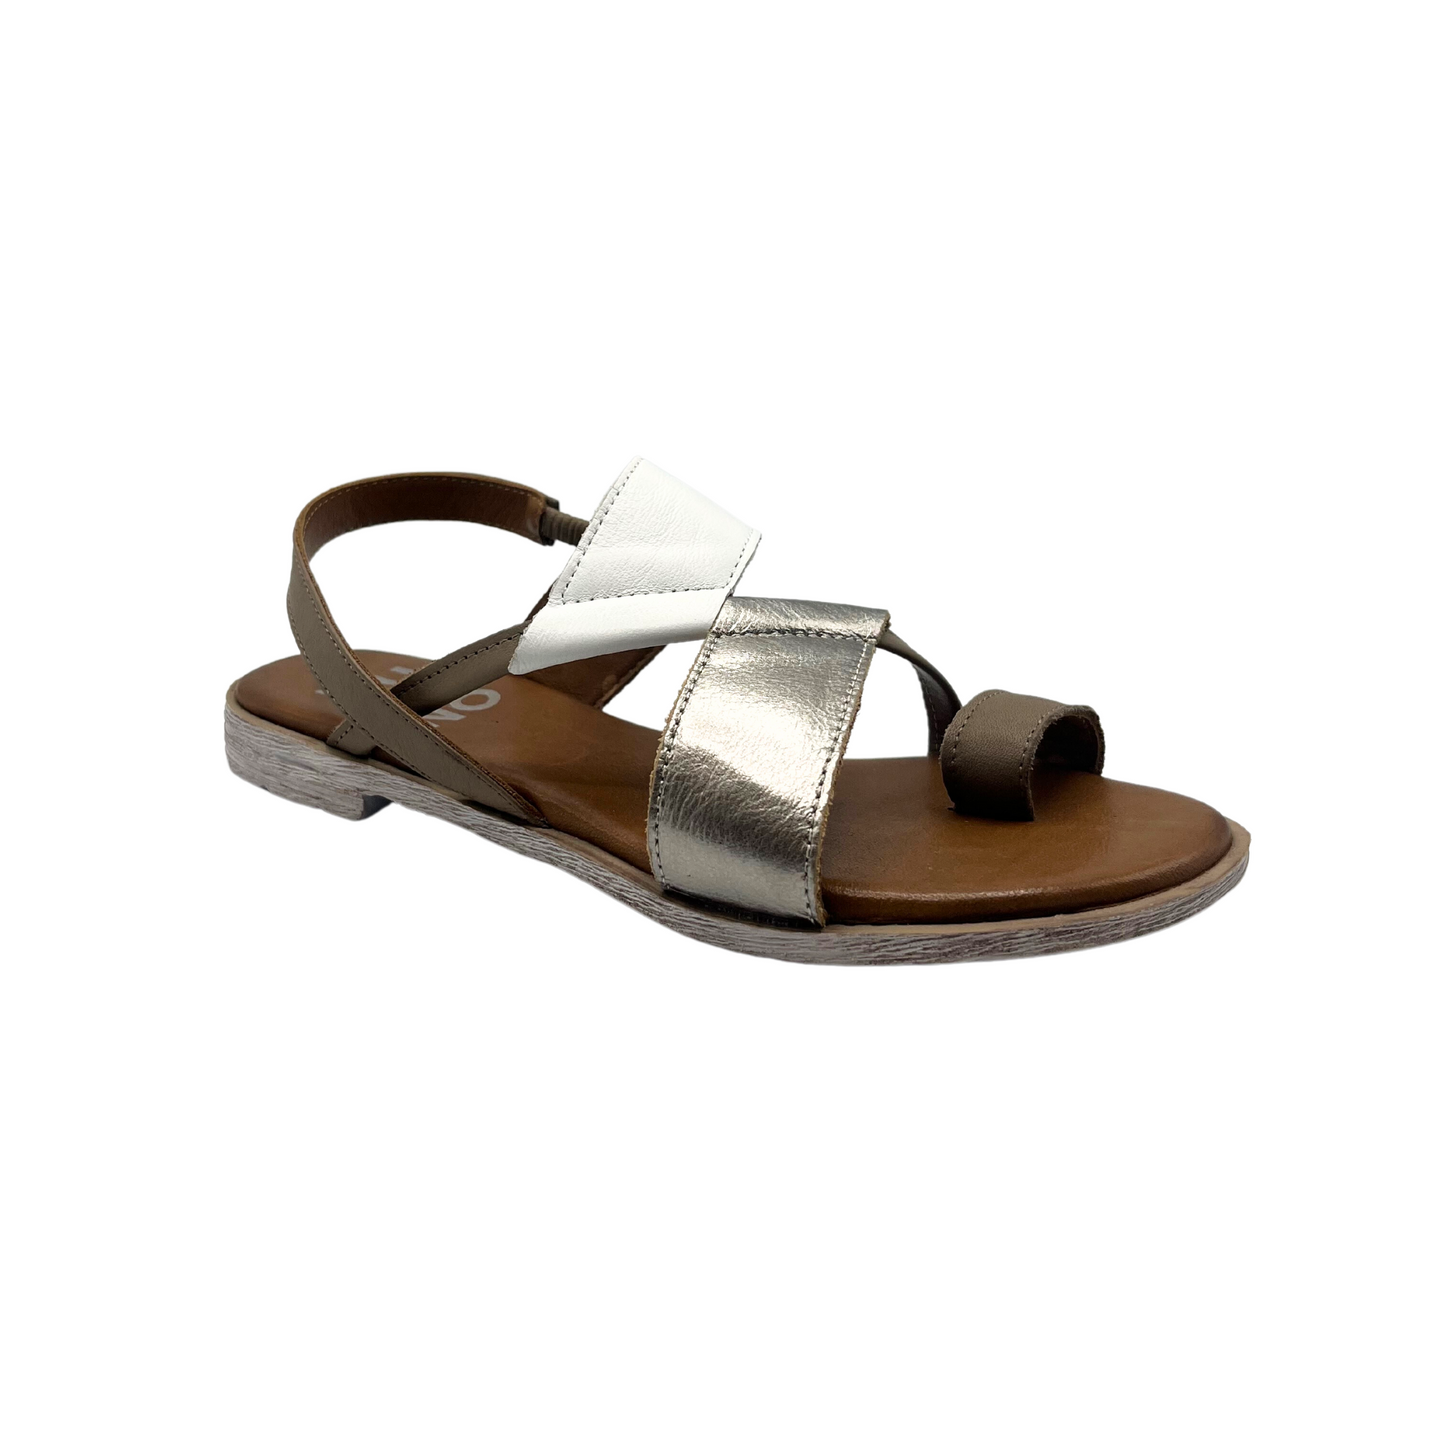 Slip on leather sandal with a toe loop at front and heel strap.  Slip on style shown in white combo - mix of white leather, dk brown and silver